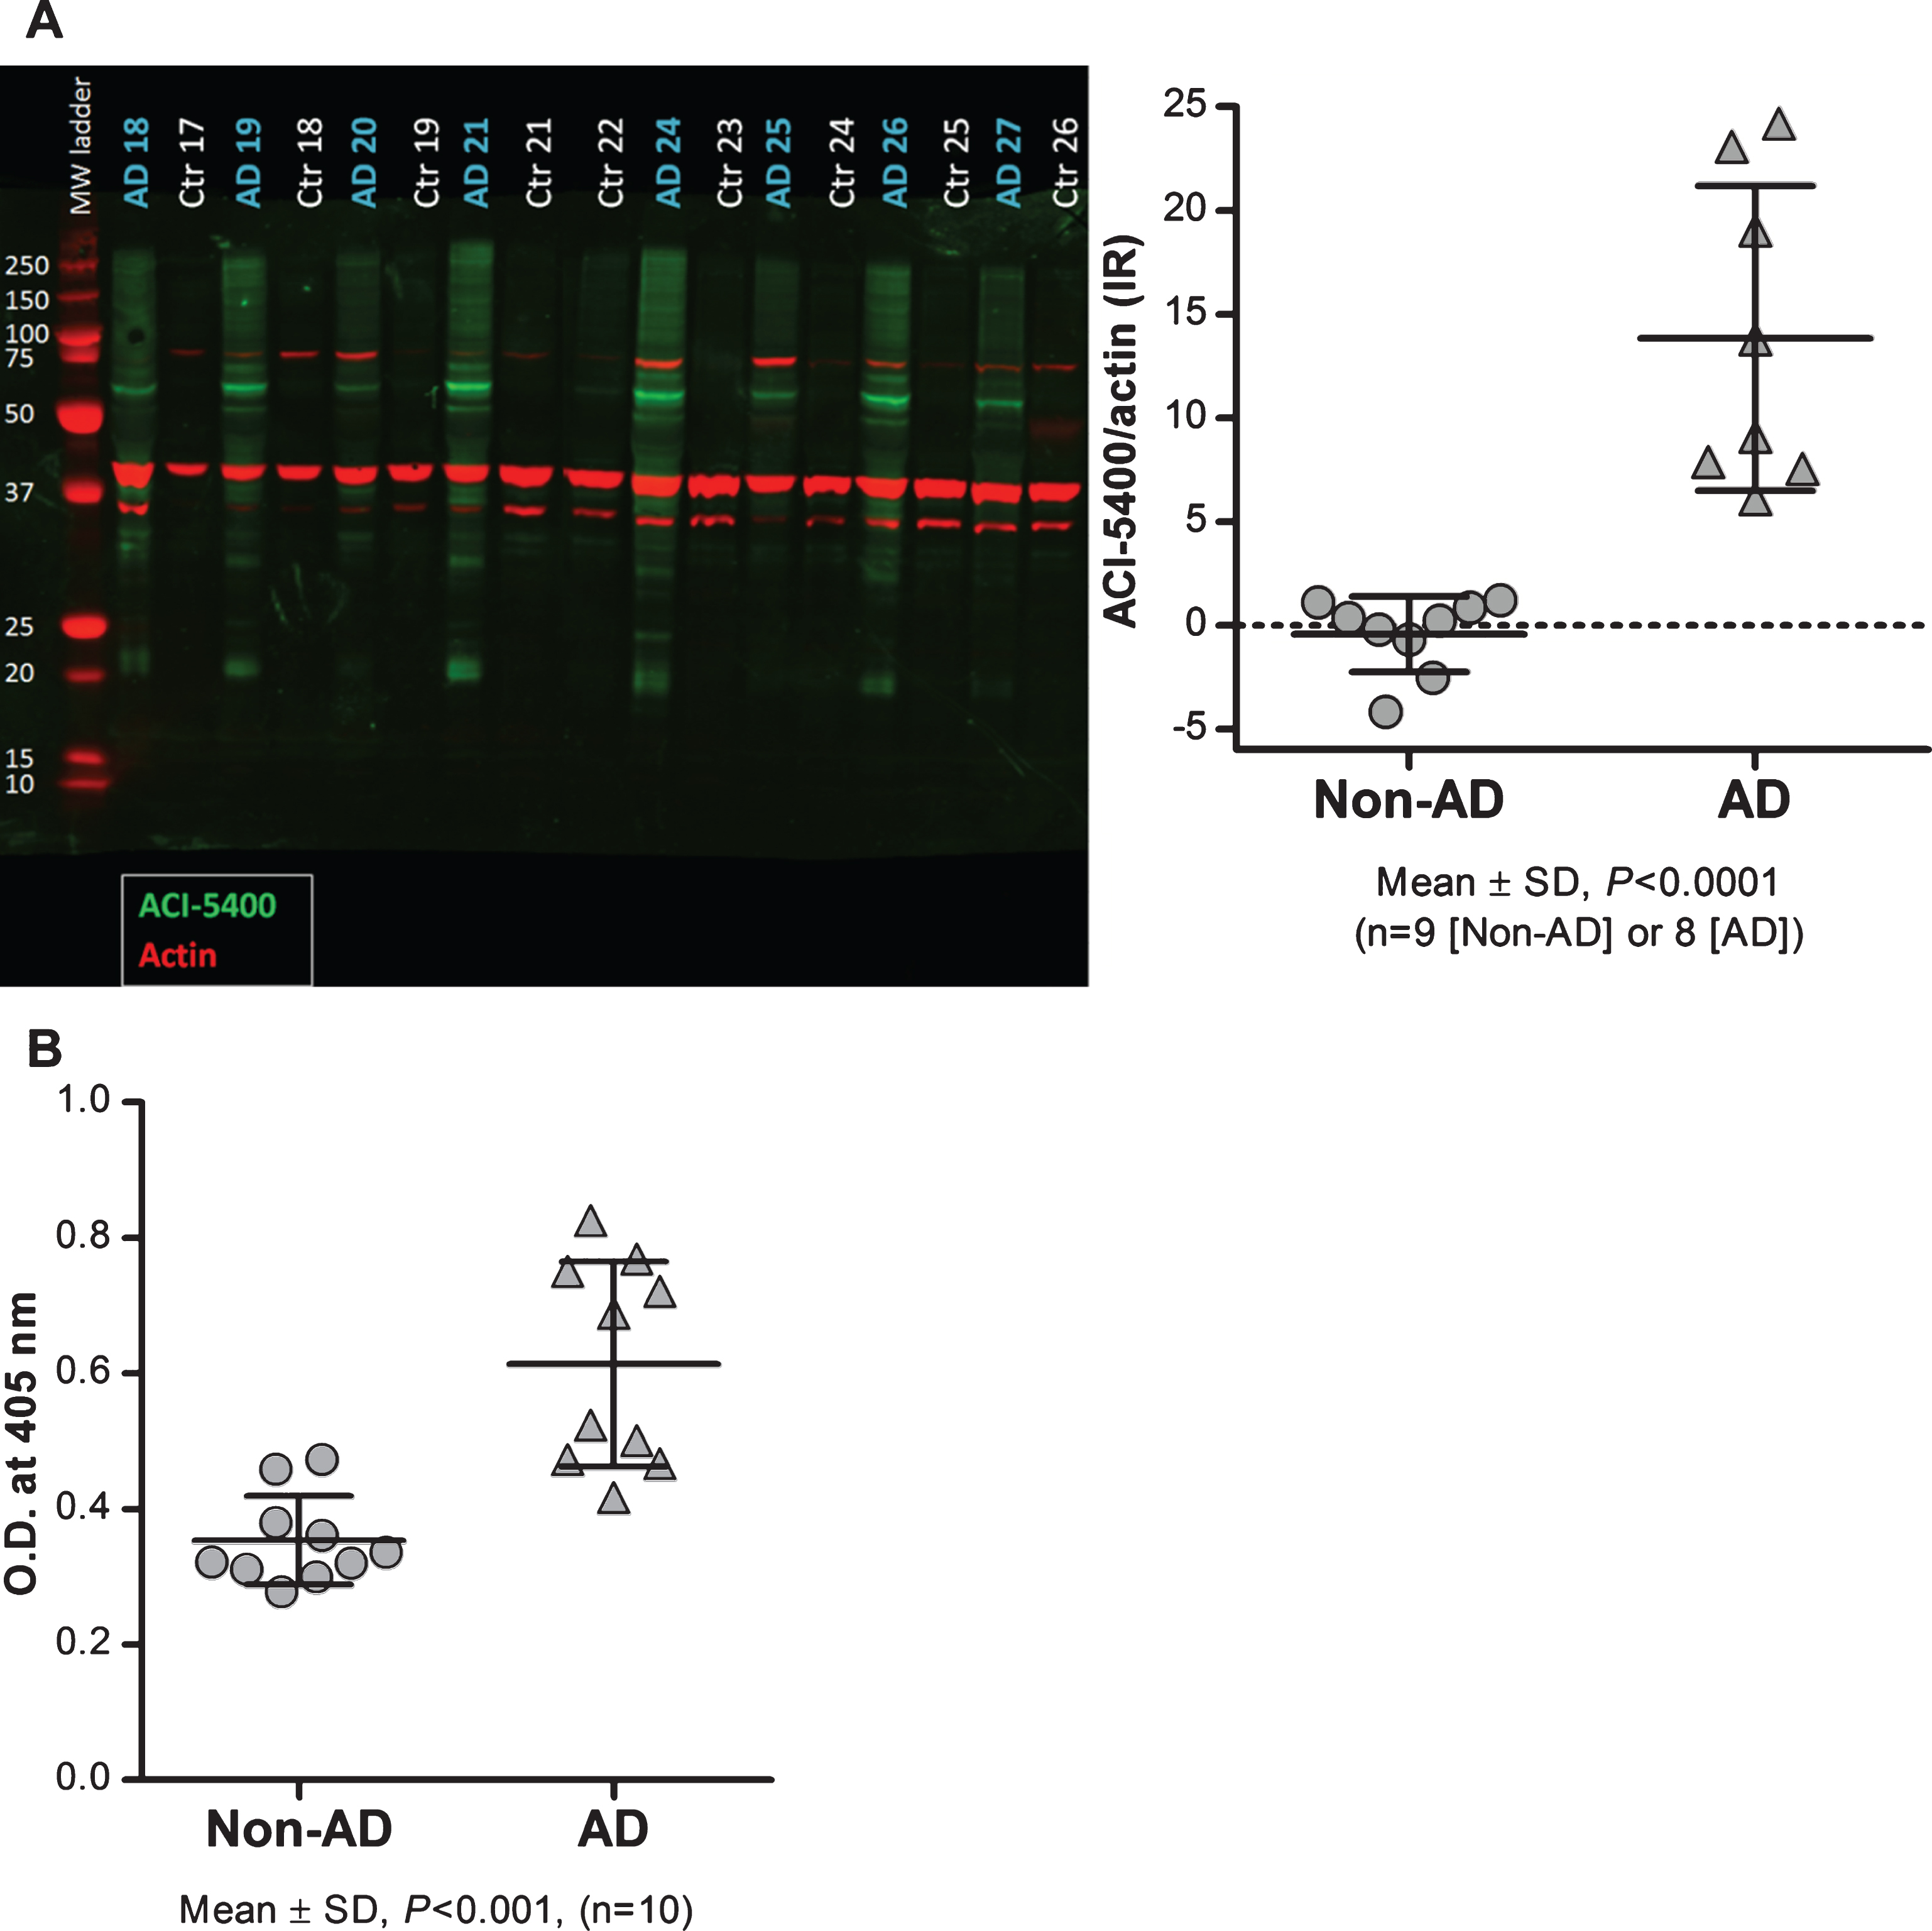 ACI-5400 detects significant higher levels of pathological Tau species in AD brain. Brain extracts from AD (n = 8) and non-AD (n = 9) subjects were analyzed by western blotting (A) and by a homotypic-ELISA (n = 10) using the ACI-5400 Mab (B). Blotting with the ACI-5400 Mab for pathological Tau species is represented in panel A by green signals for ACI-5400, red signals for actin, and with quantitation shown to the left. In panel A and panel B, individual values and means±SD are shown. In both assays the difference between non-AD and AD was statistically significant as indicated under each graph.